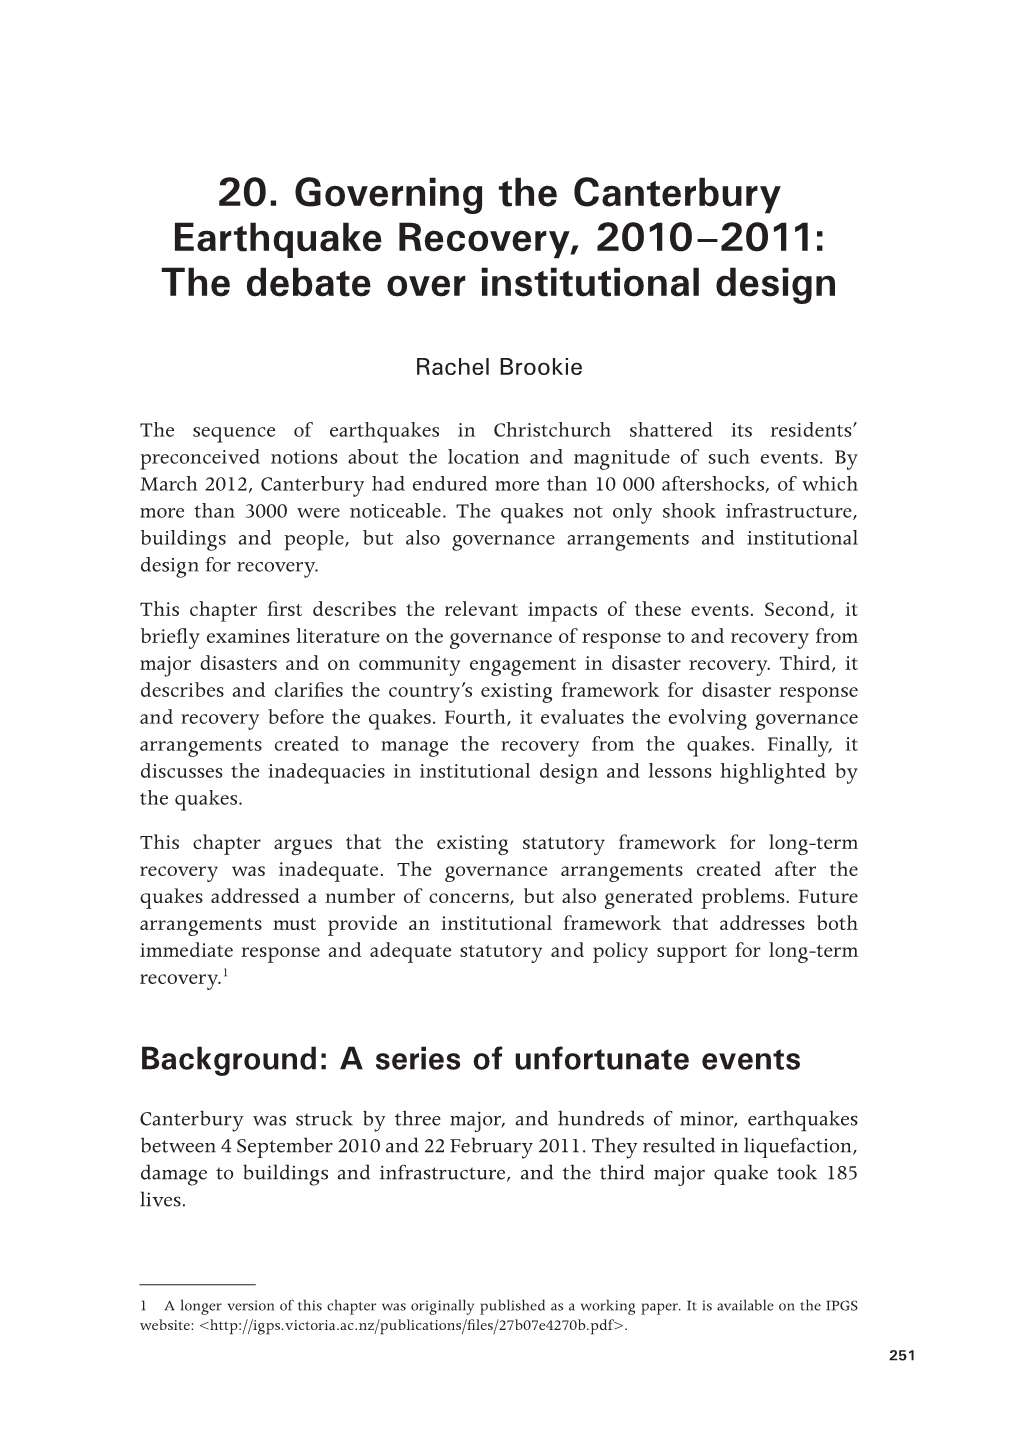 20. Governing the Canterbury Earthquake Recovery, 2010–2011: the Debate Over Institutional Design